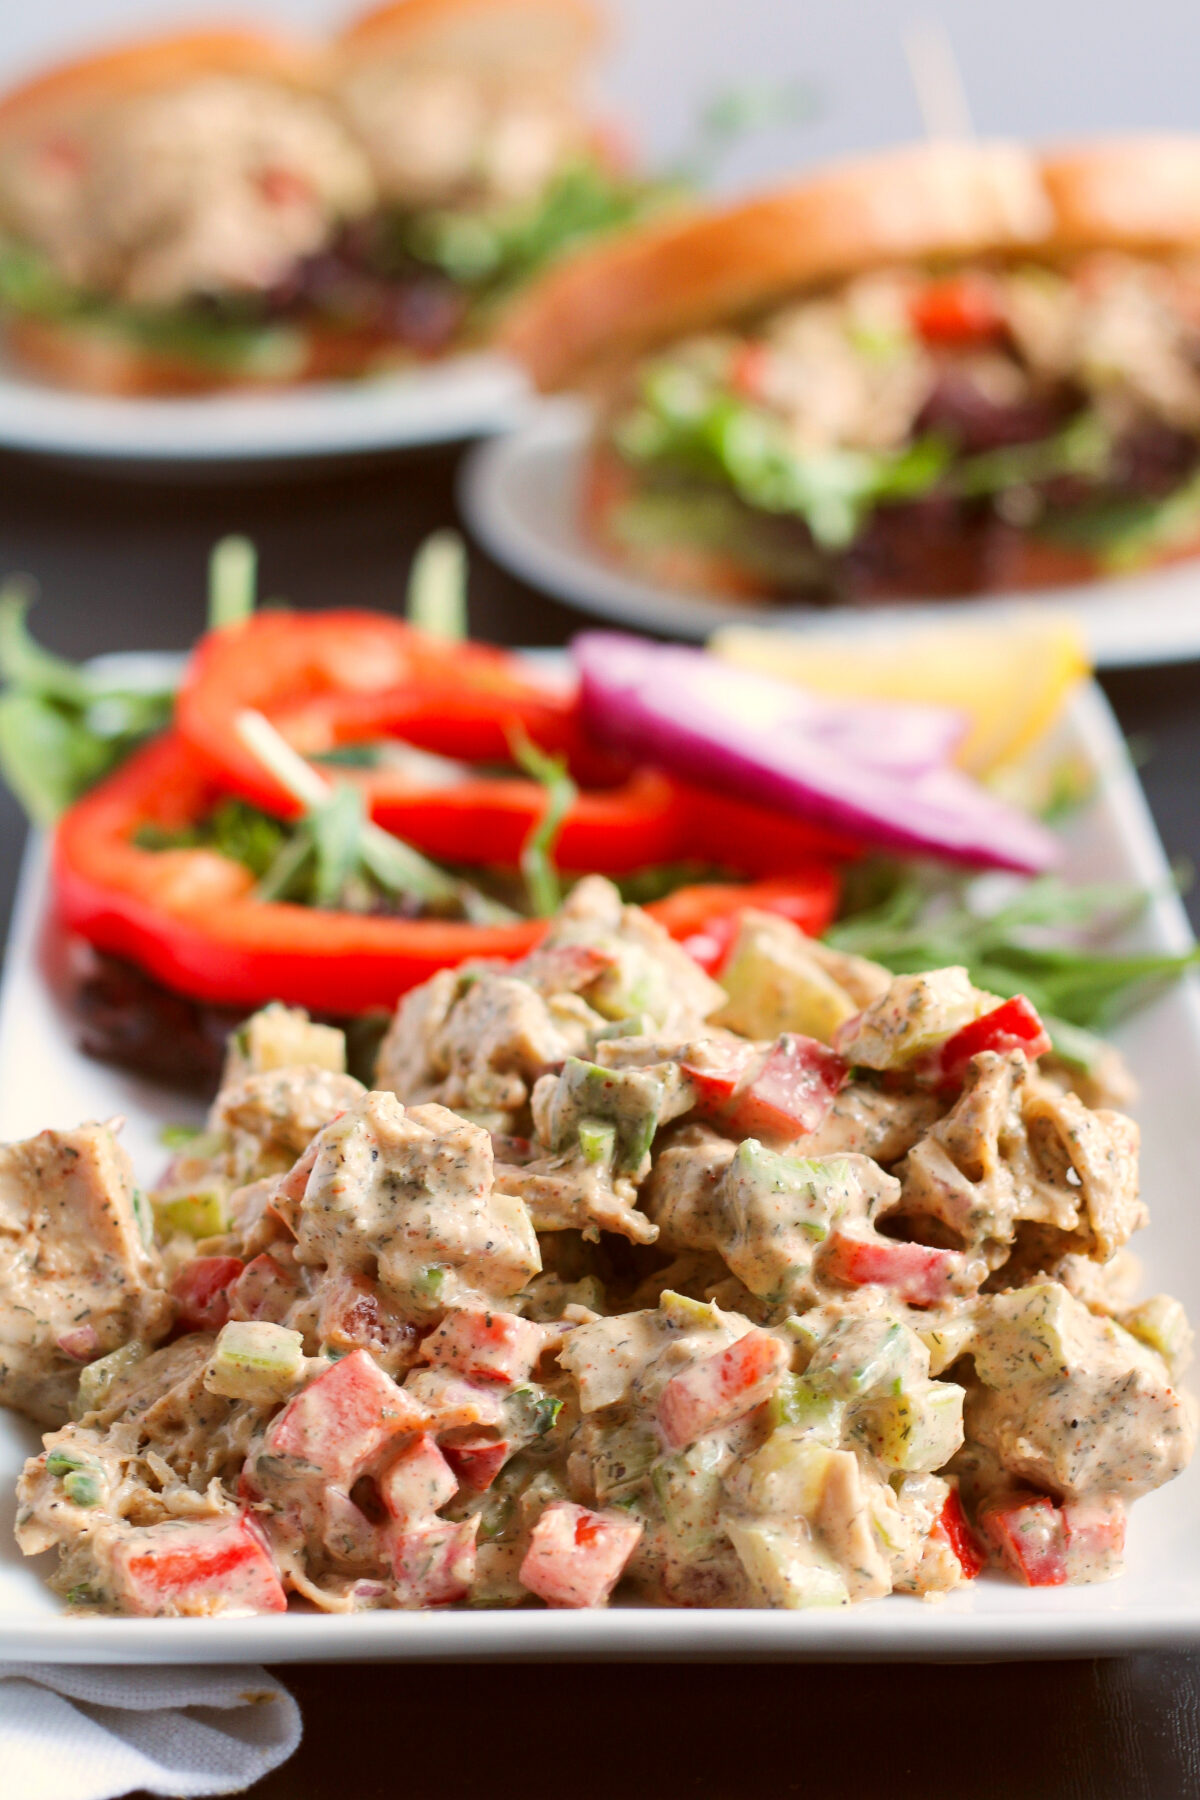 Make your next lunch an unforgettable one with this delicious and easy avocado chicken salad recipe - it's a healthy twist on a classic!